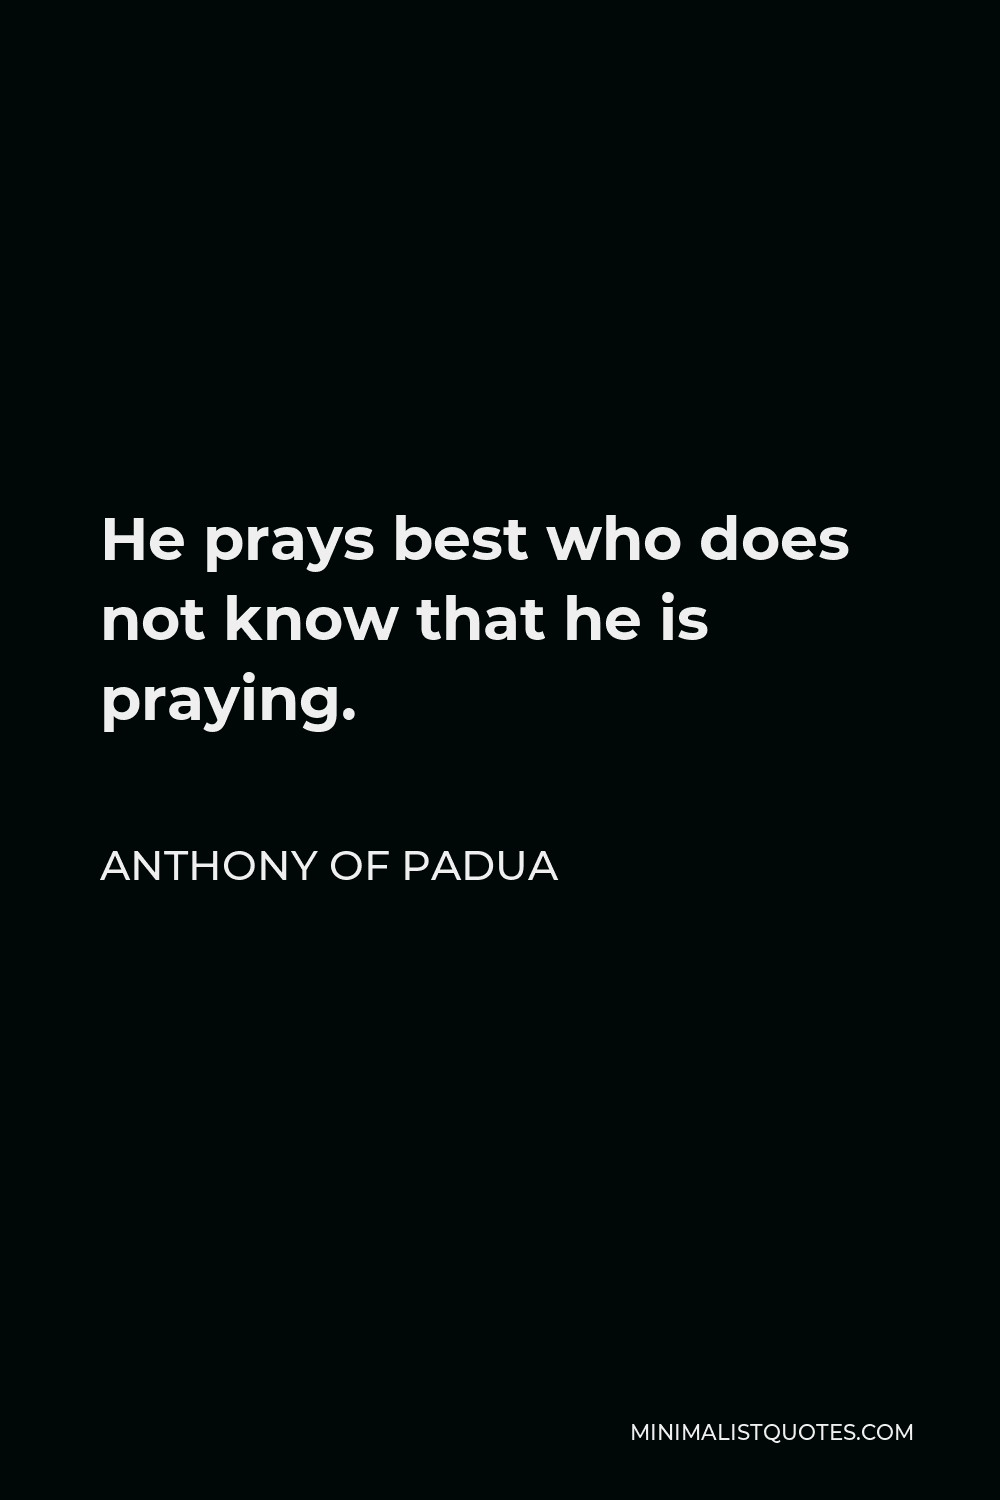 Anthony of Padua Quote - He prays best who does not know that he is praying.